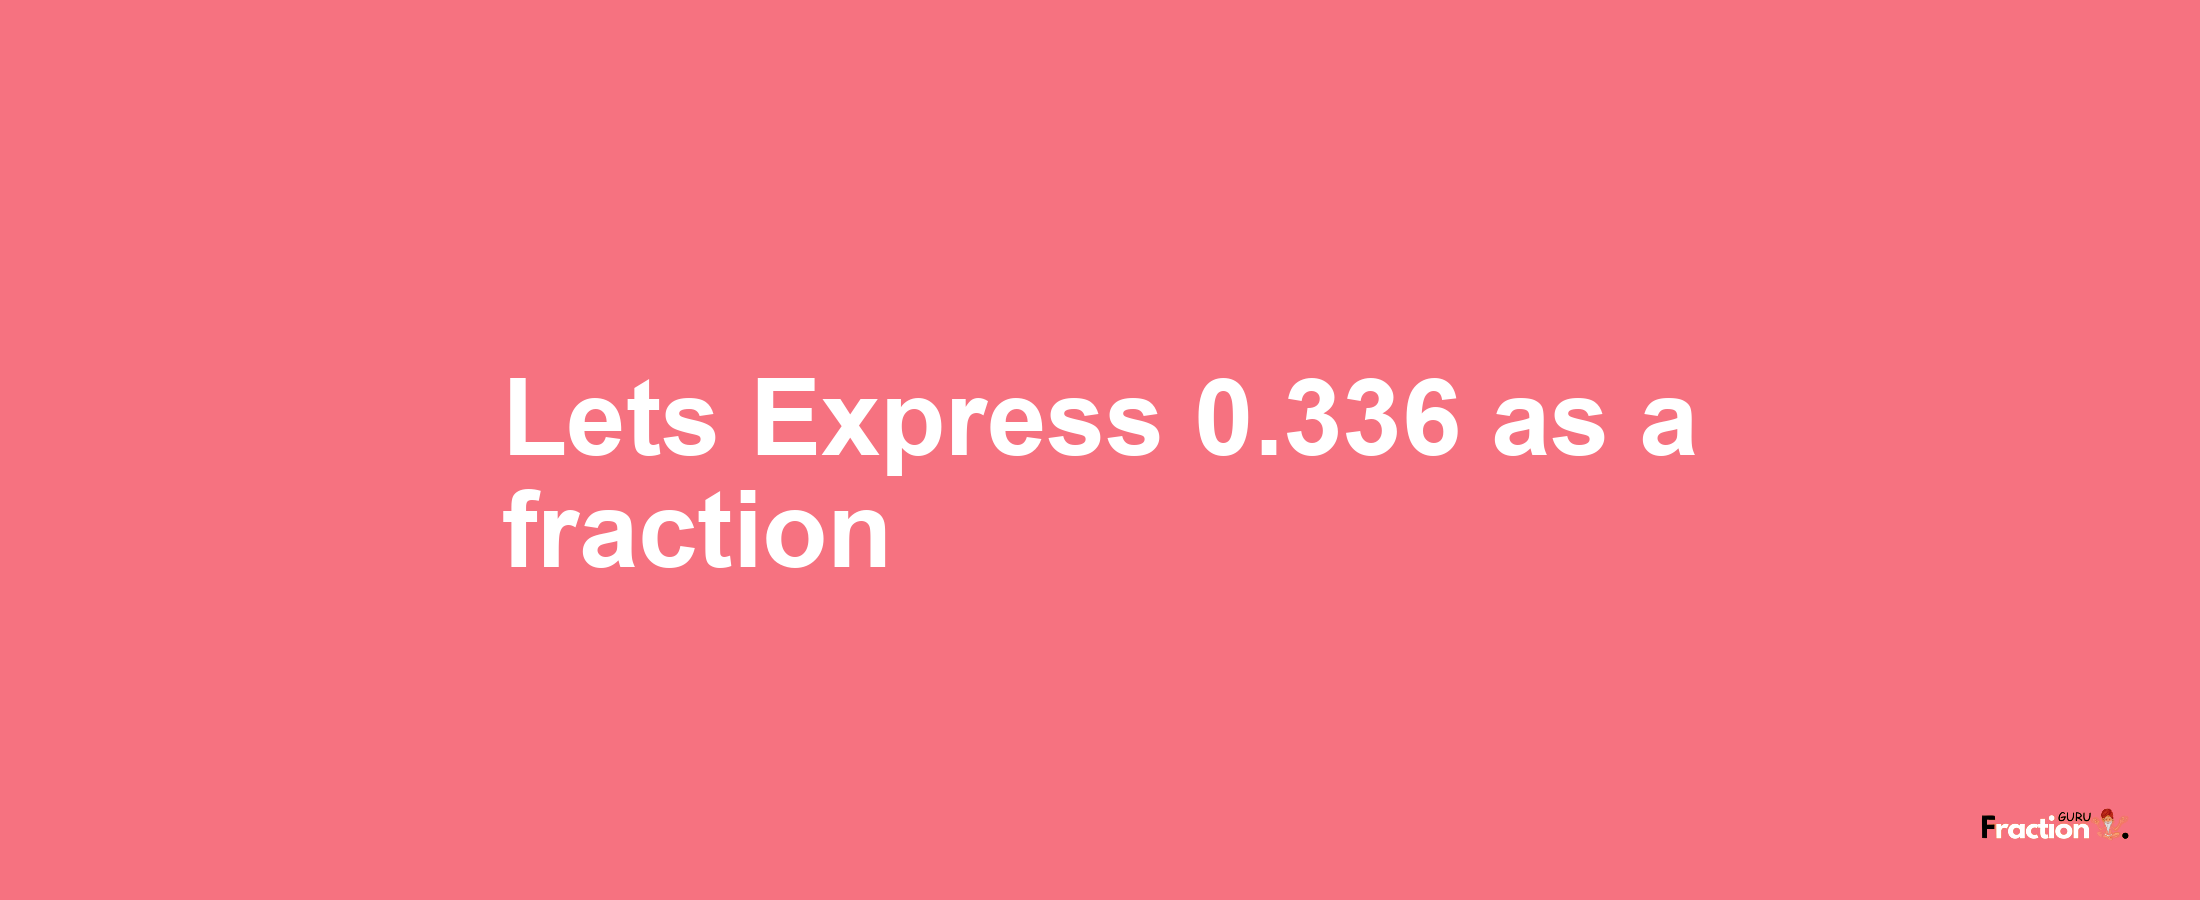 Lets Express 0.336 as afraction